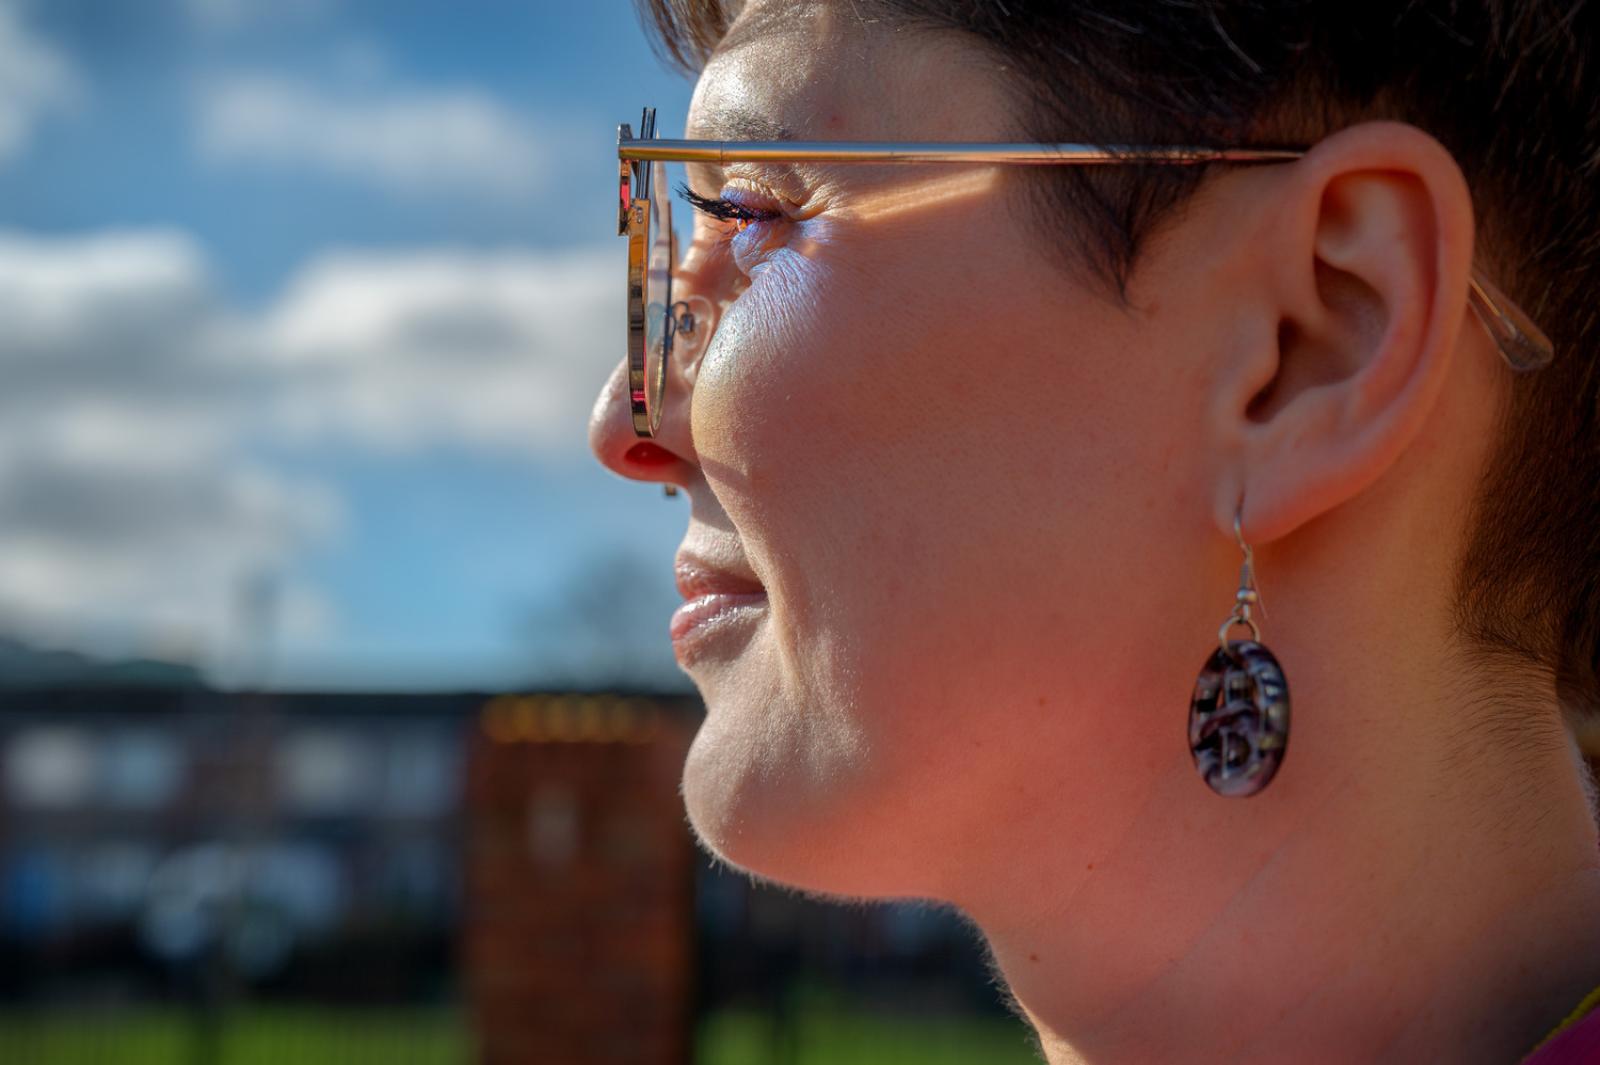 the side profile of a lady with short brown hair wearing sunglasses